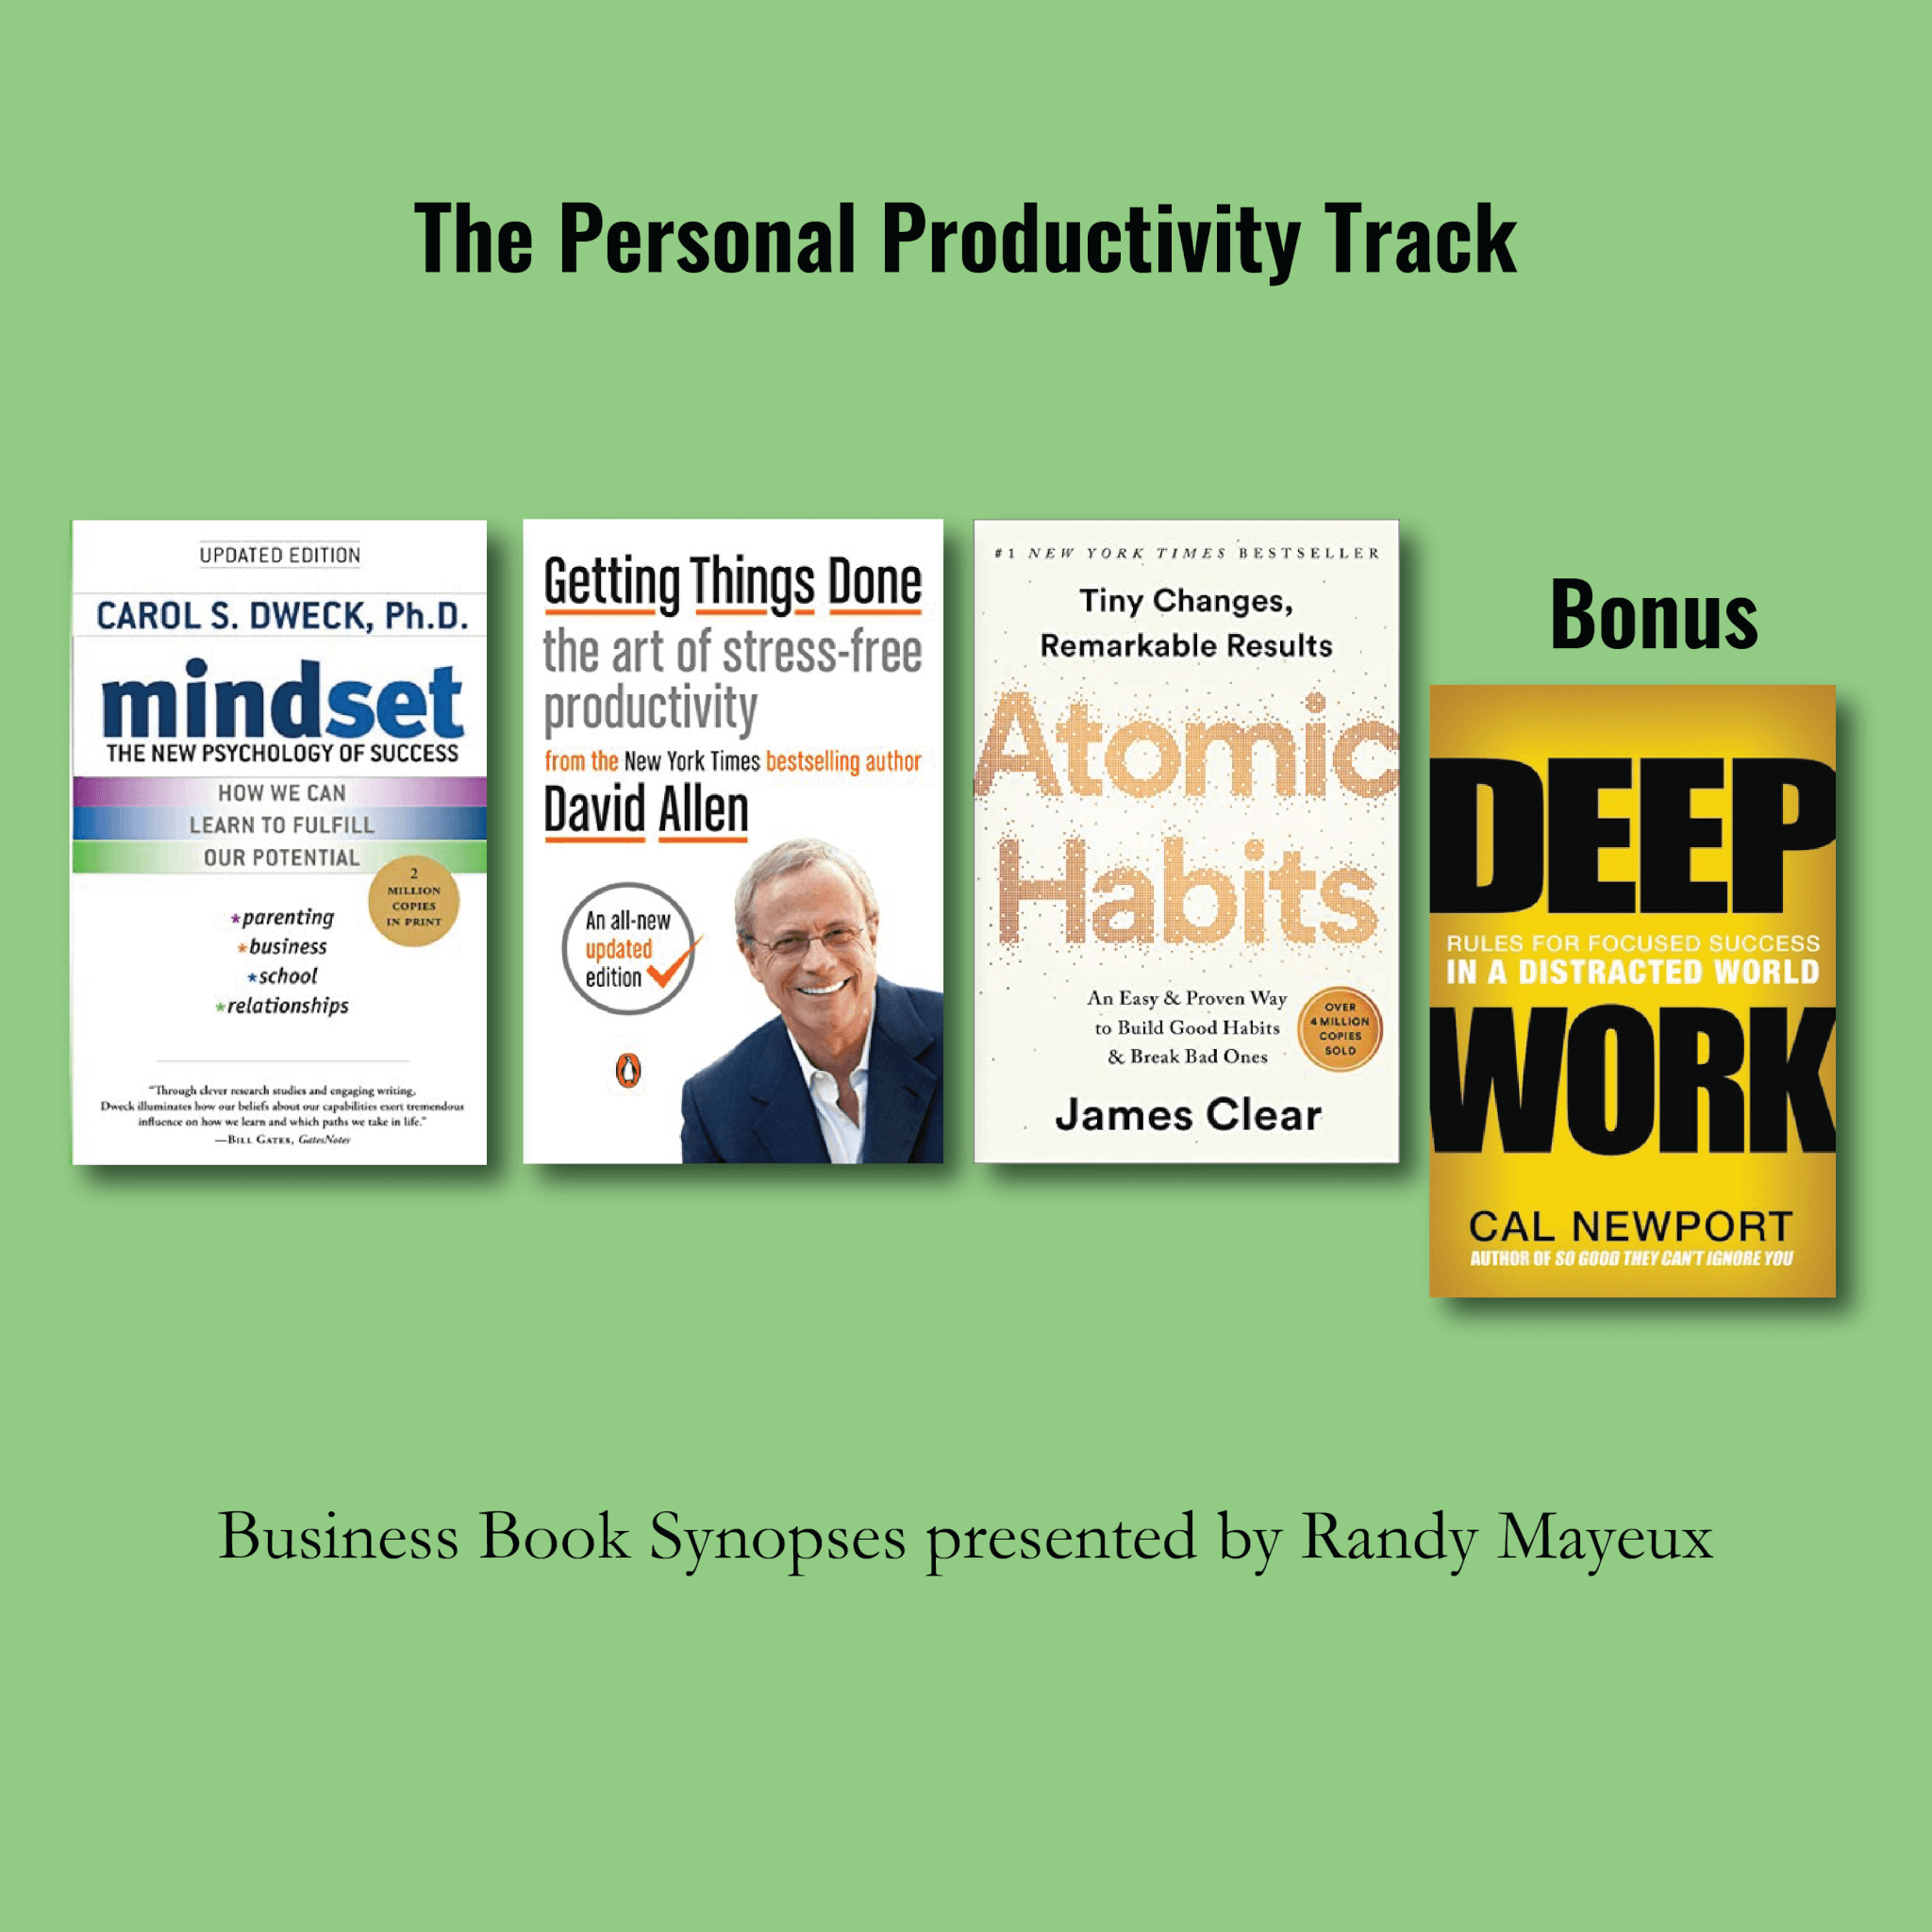 The Personal Productivity Track; book cover images for" #1 – "Mindset: The New Psychology of Success" by Carol S. Dweck, Ph.D. #2 — "Getting Things Done: The Art of Stress-Free Productivity" by David Allen #3 – "Atomic Habits: An Easy & Proven Way to Build Good Habits & Break Bad Ones" by James Clear Bonus: "Deep Work" by Cal Newport